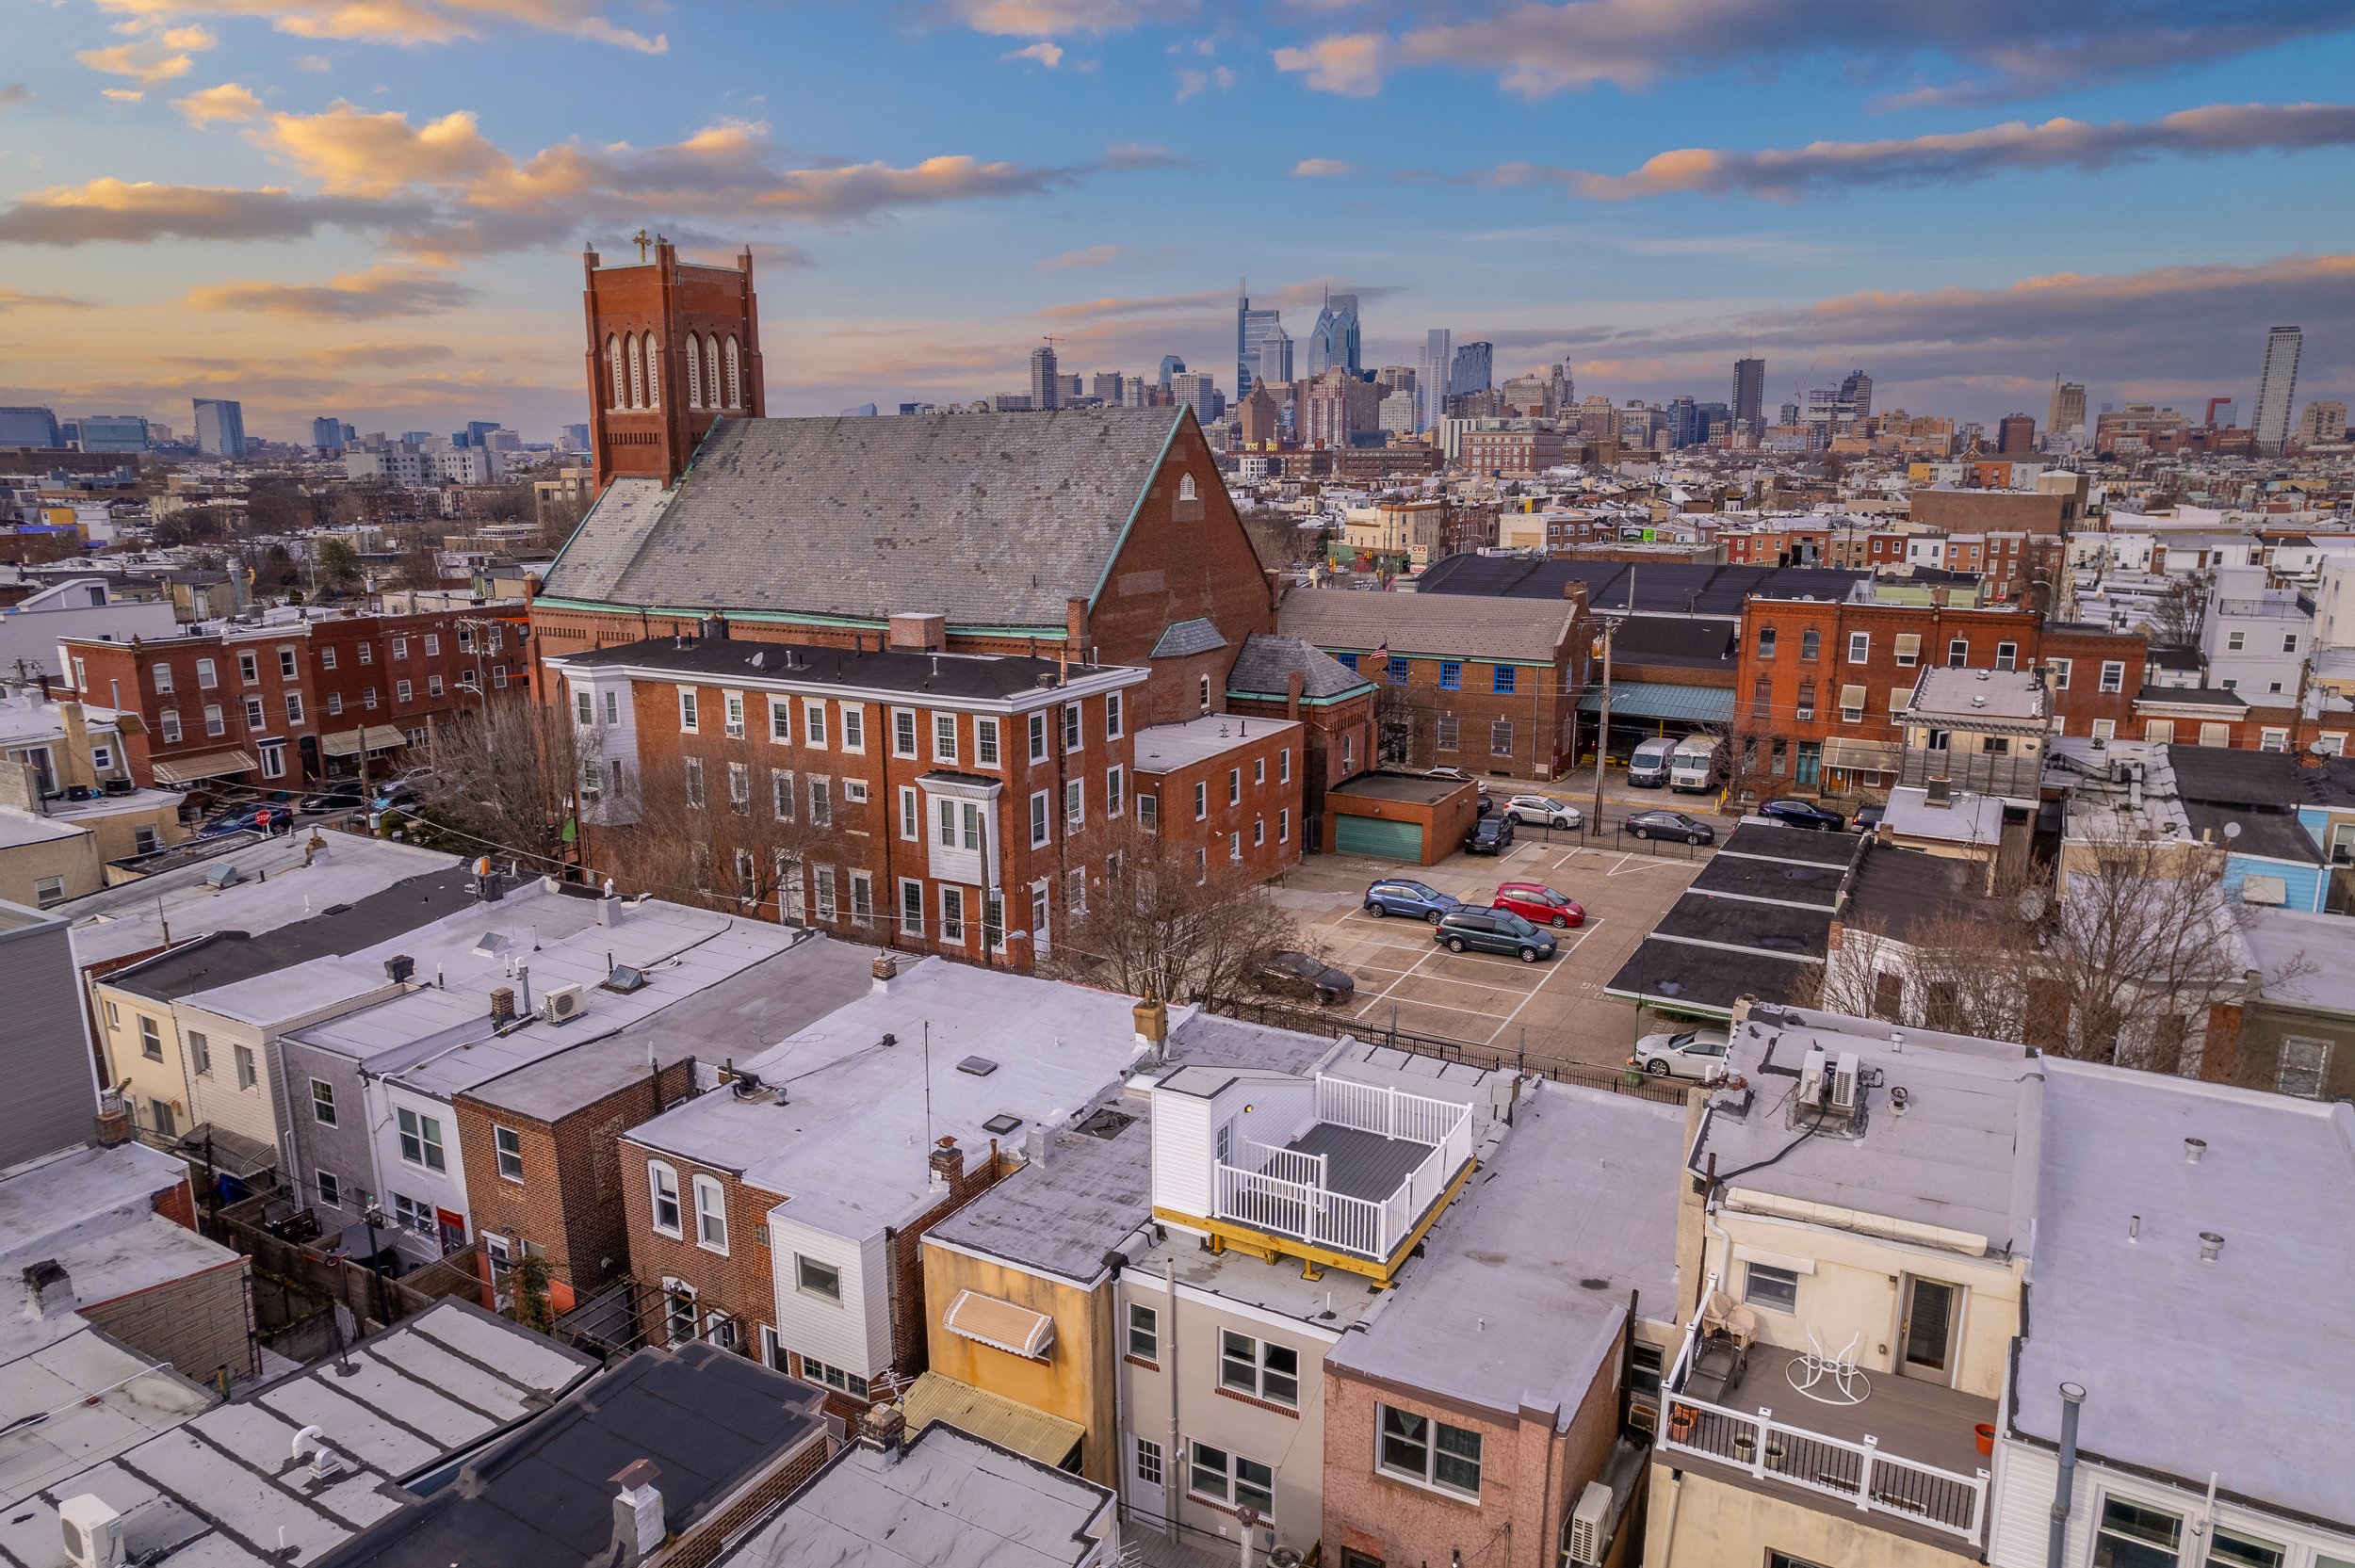 914 GREENWICH ST AERIAL PHOTOGRAPHY Ⓒ WEFILMPHILLY-2.jpg